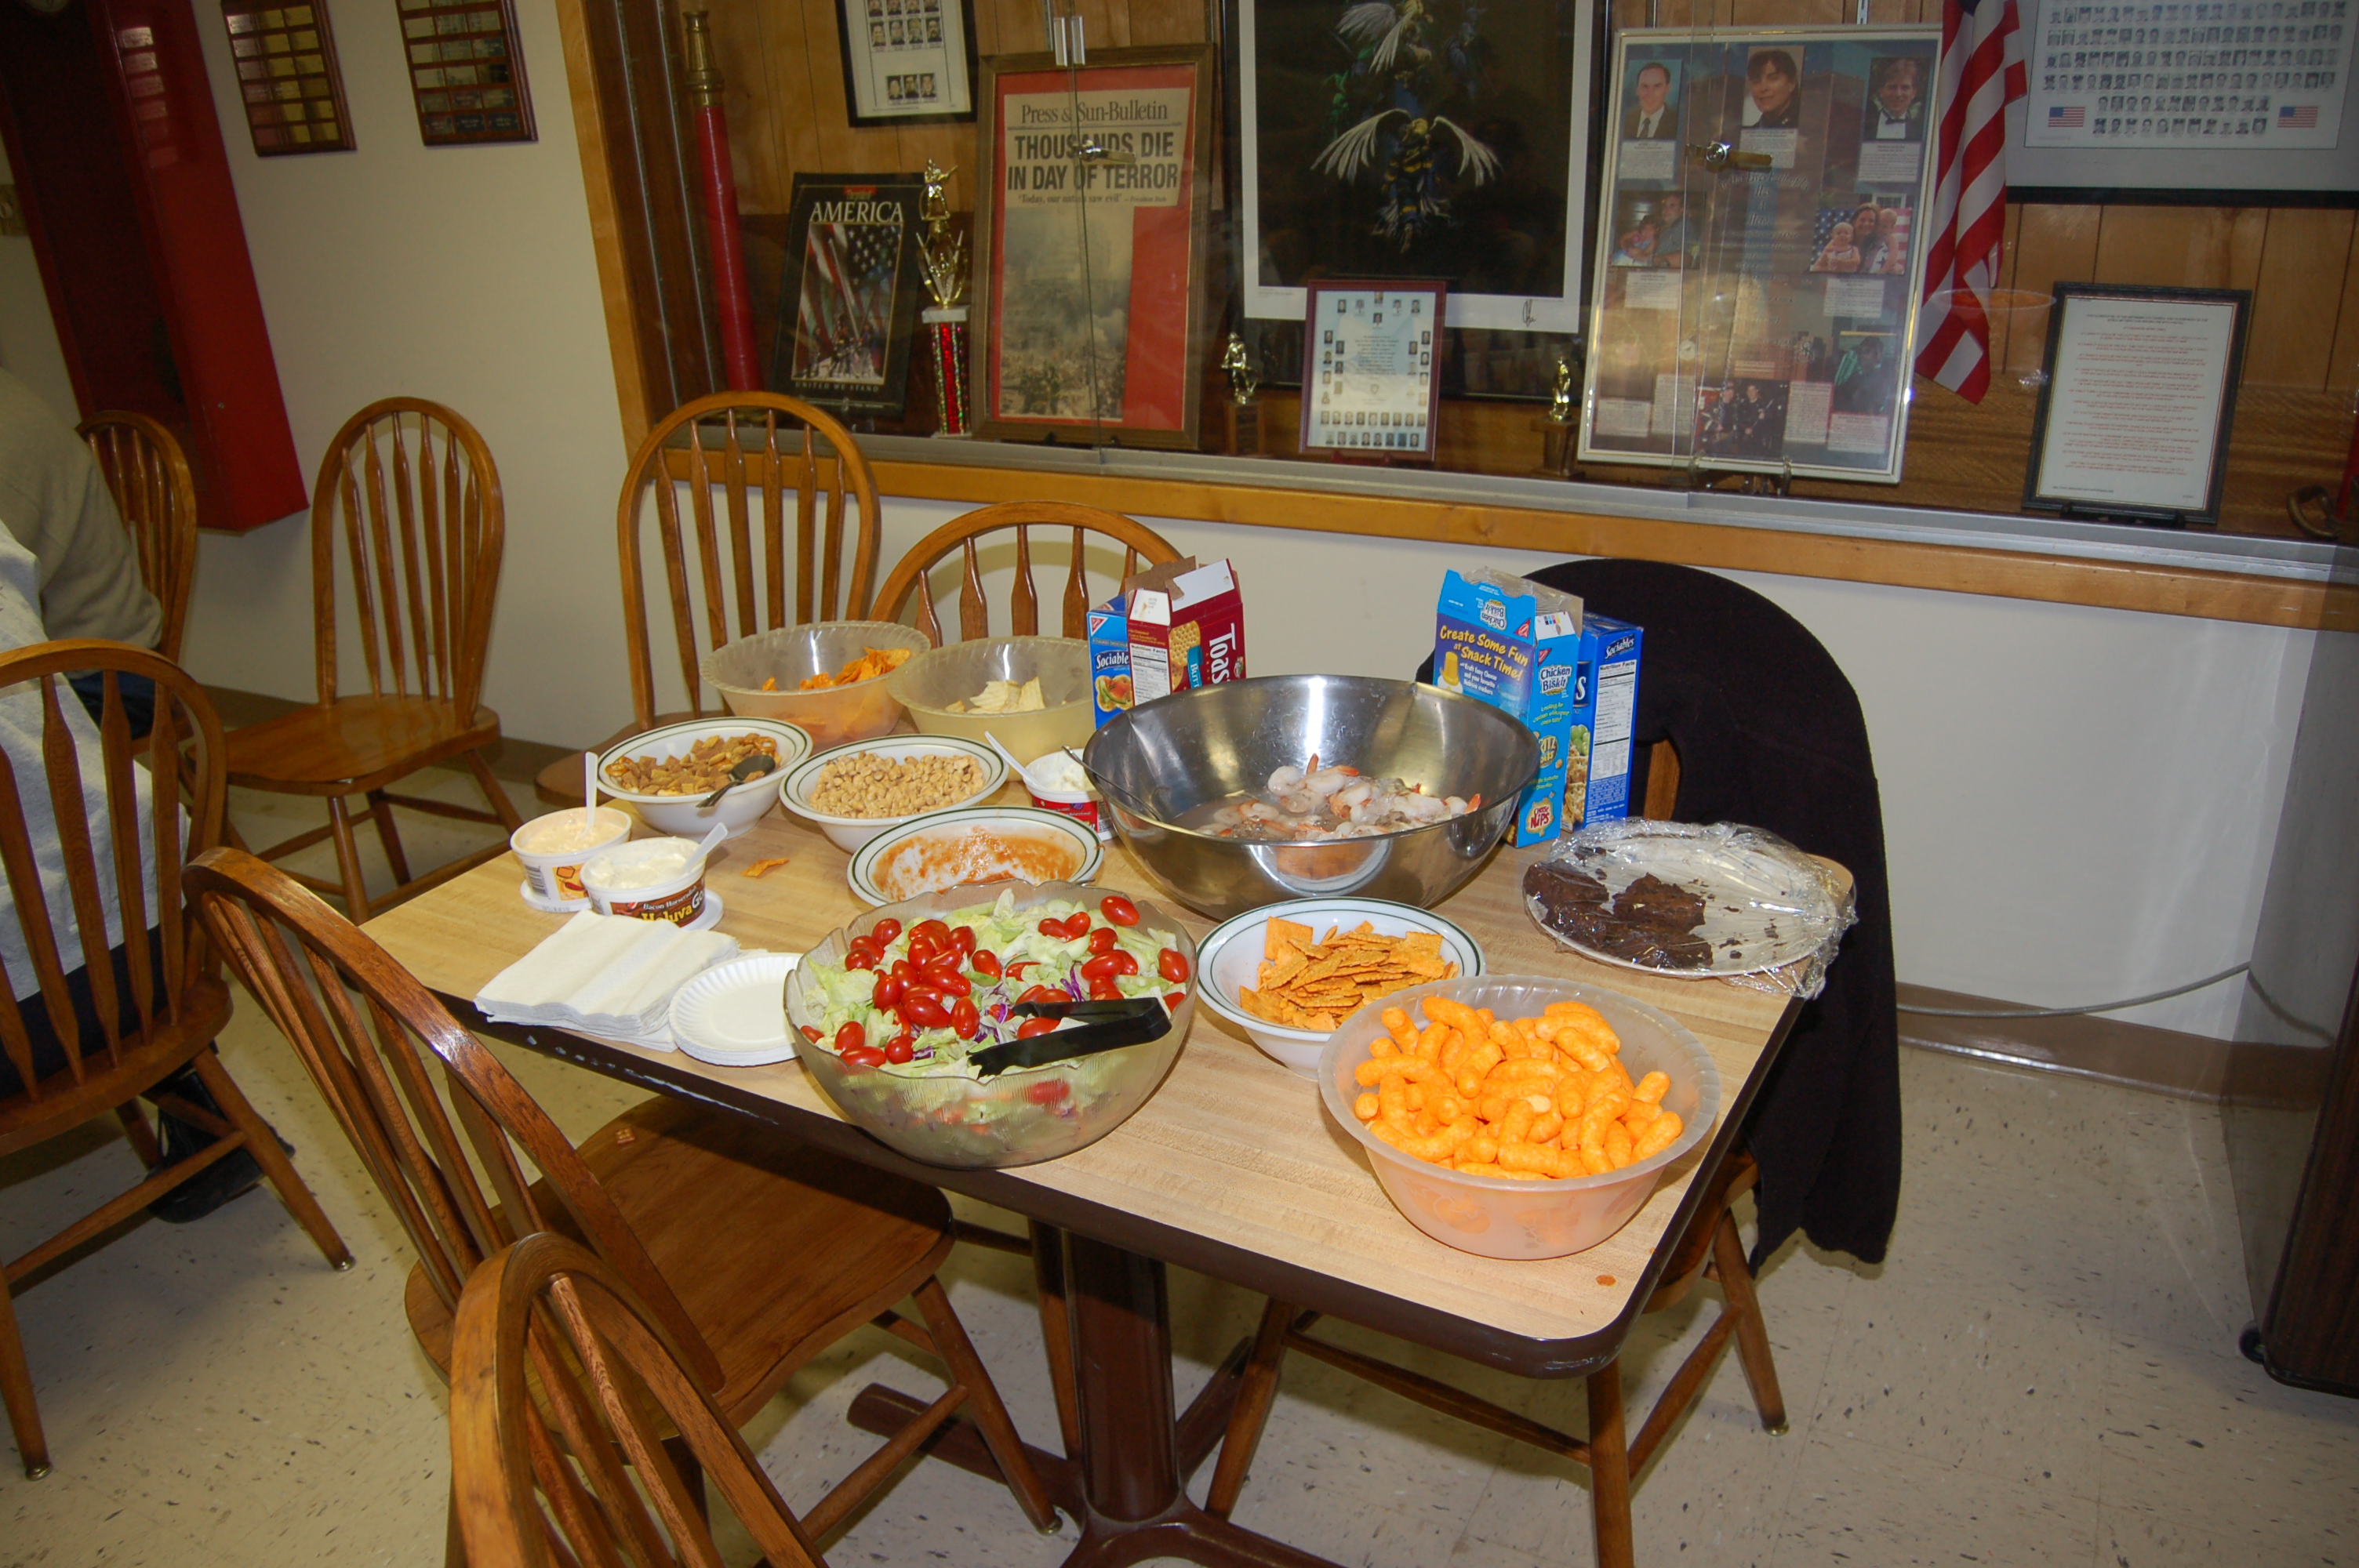 02-06-11  Other - Super Bowl Party